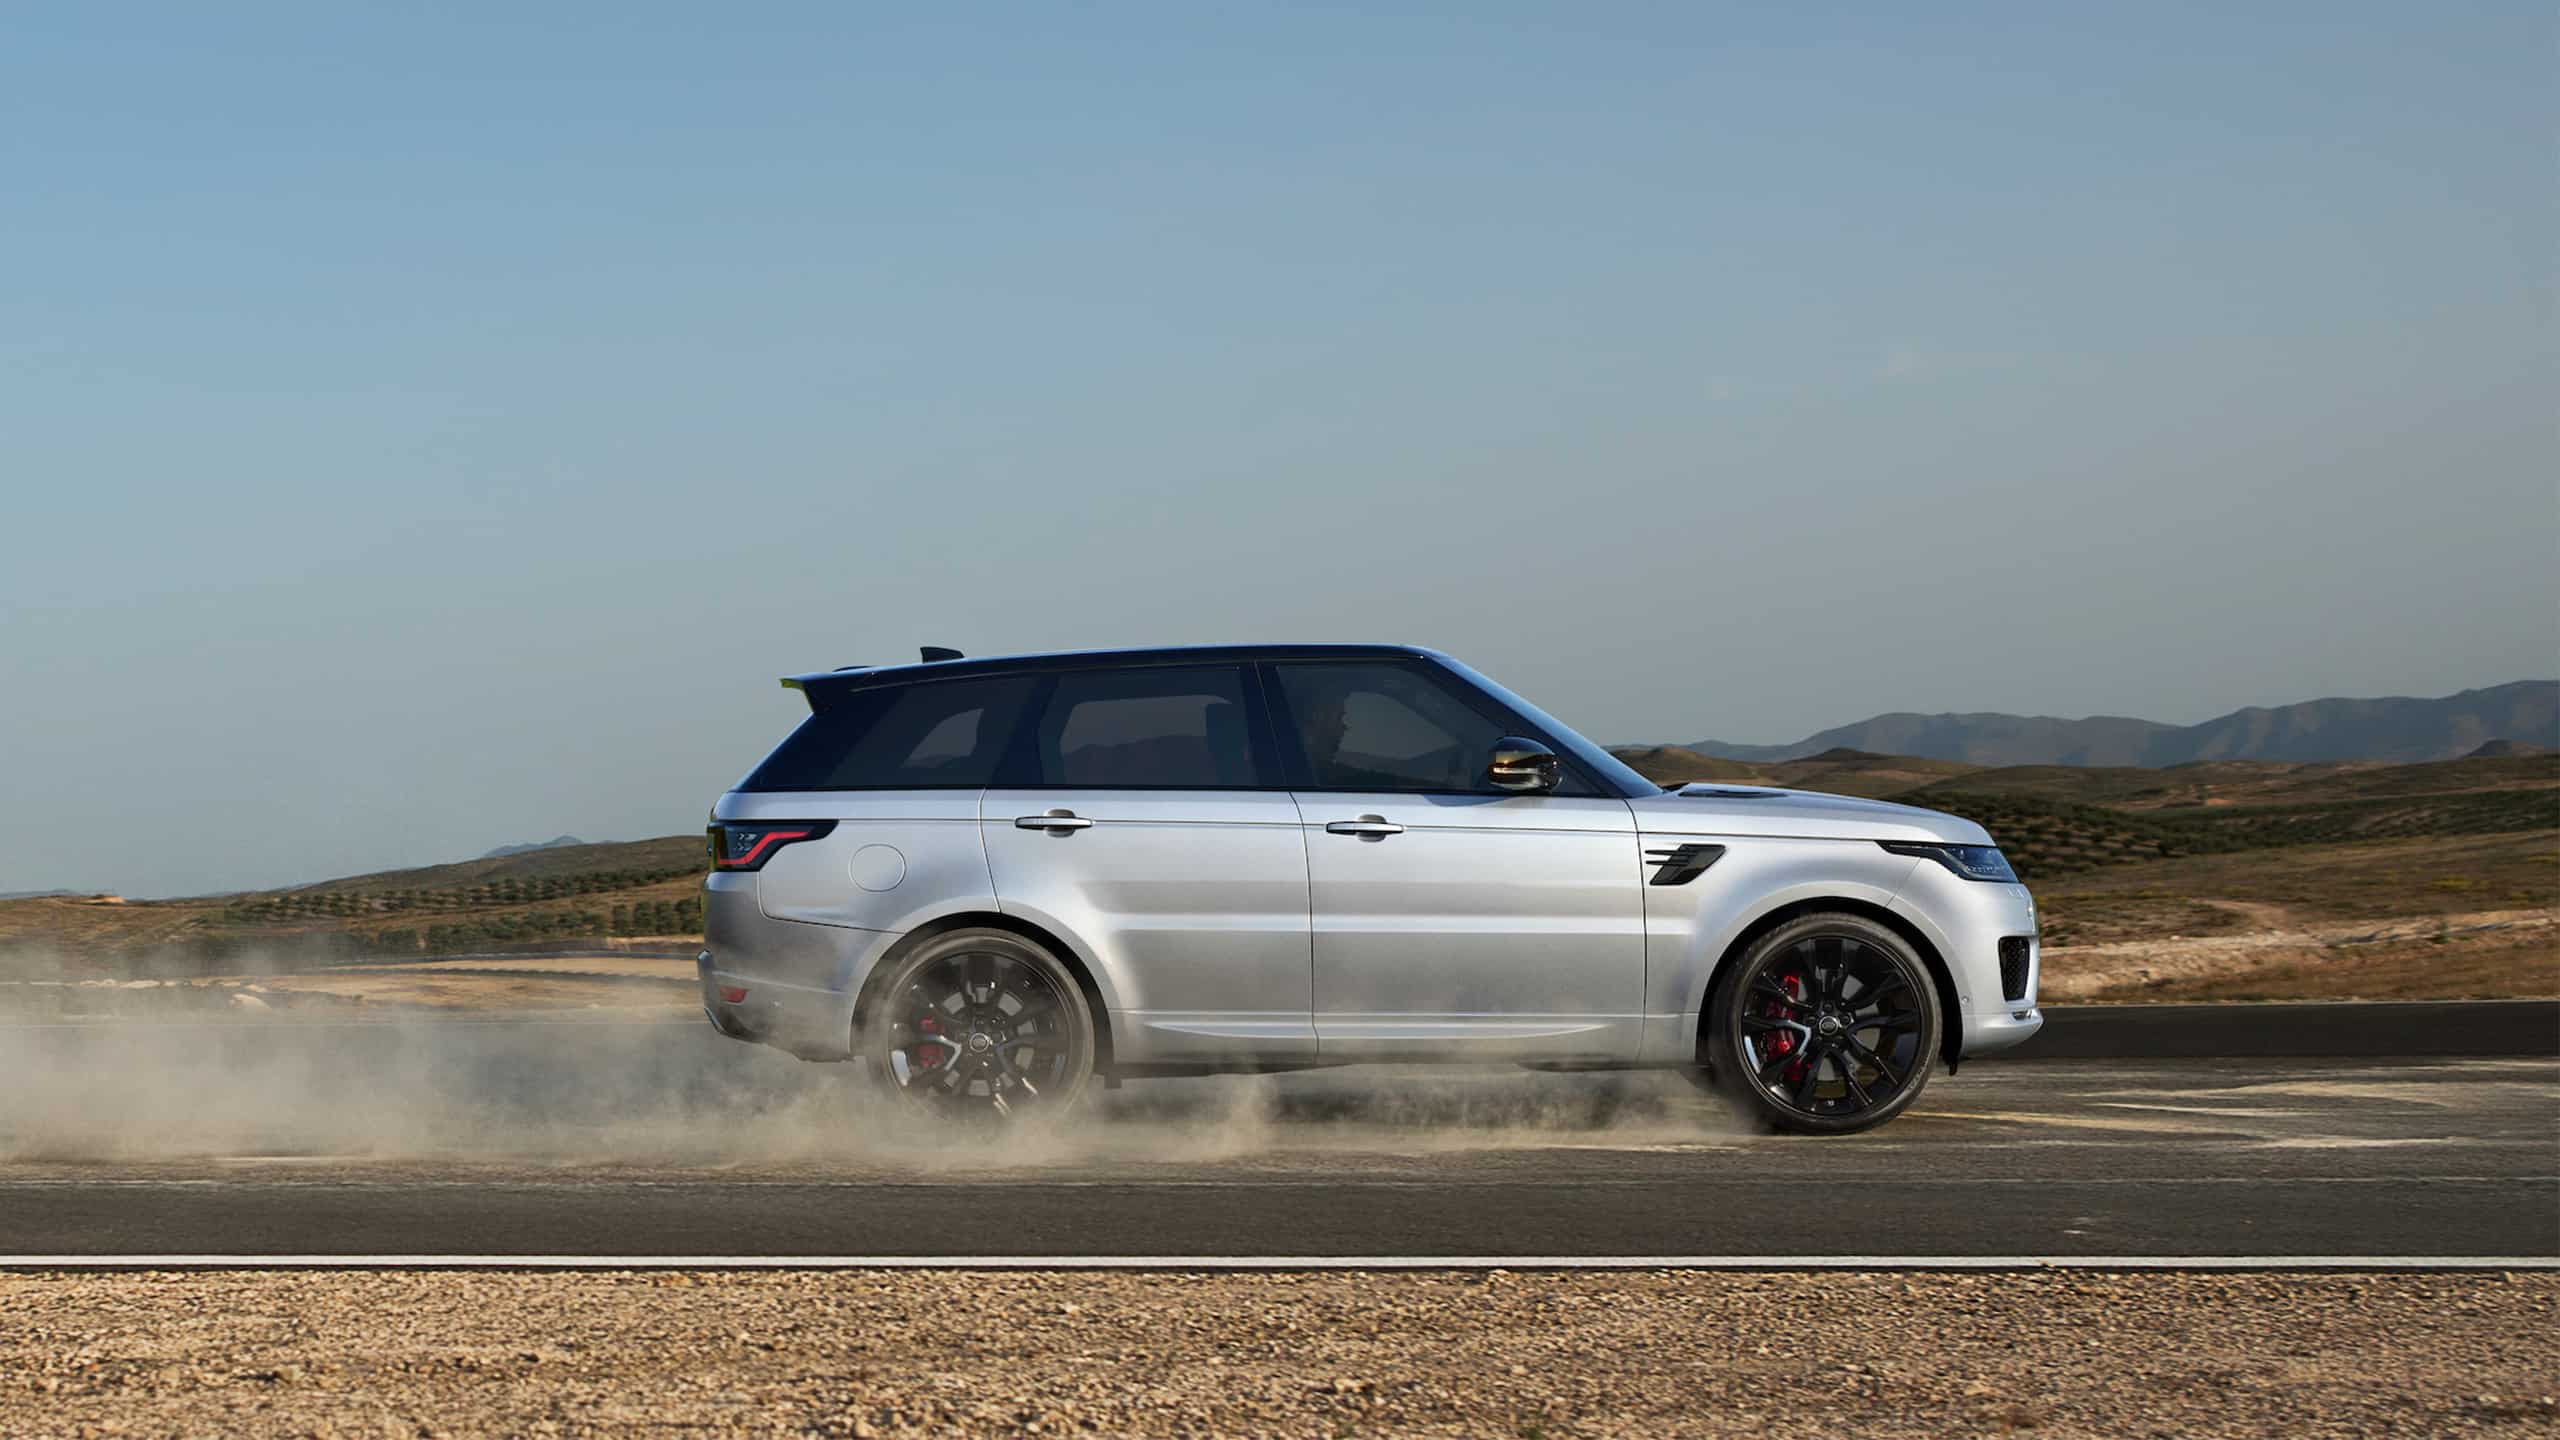 Range Rover Sport rolling on the road